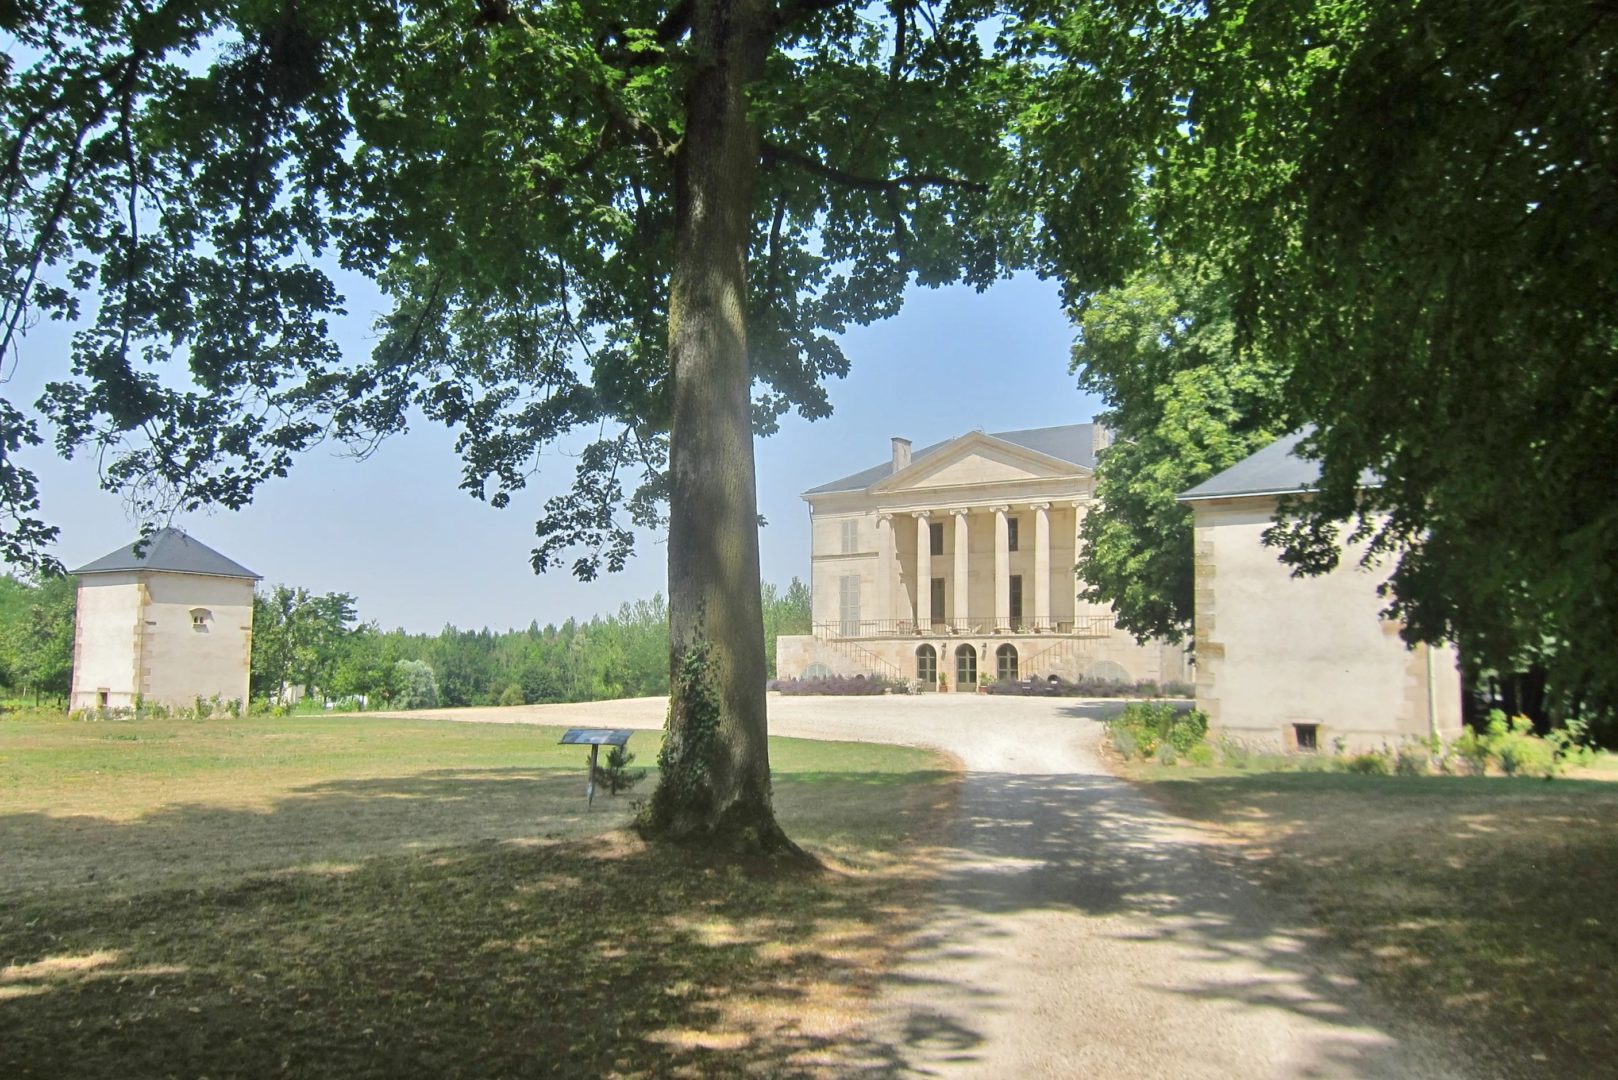 NEO-CLASSIC CASTLE OF PALLADIAN STYLE BEGINNING OF XIXth CENTURY CLASS MH, PARK OF ENV. 12 HECTARES REGISTER MH - 1514EL